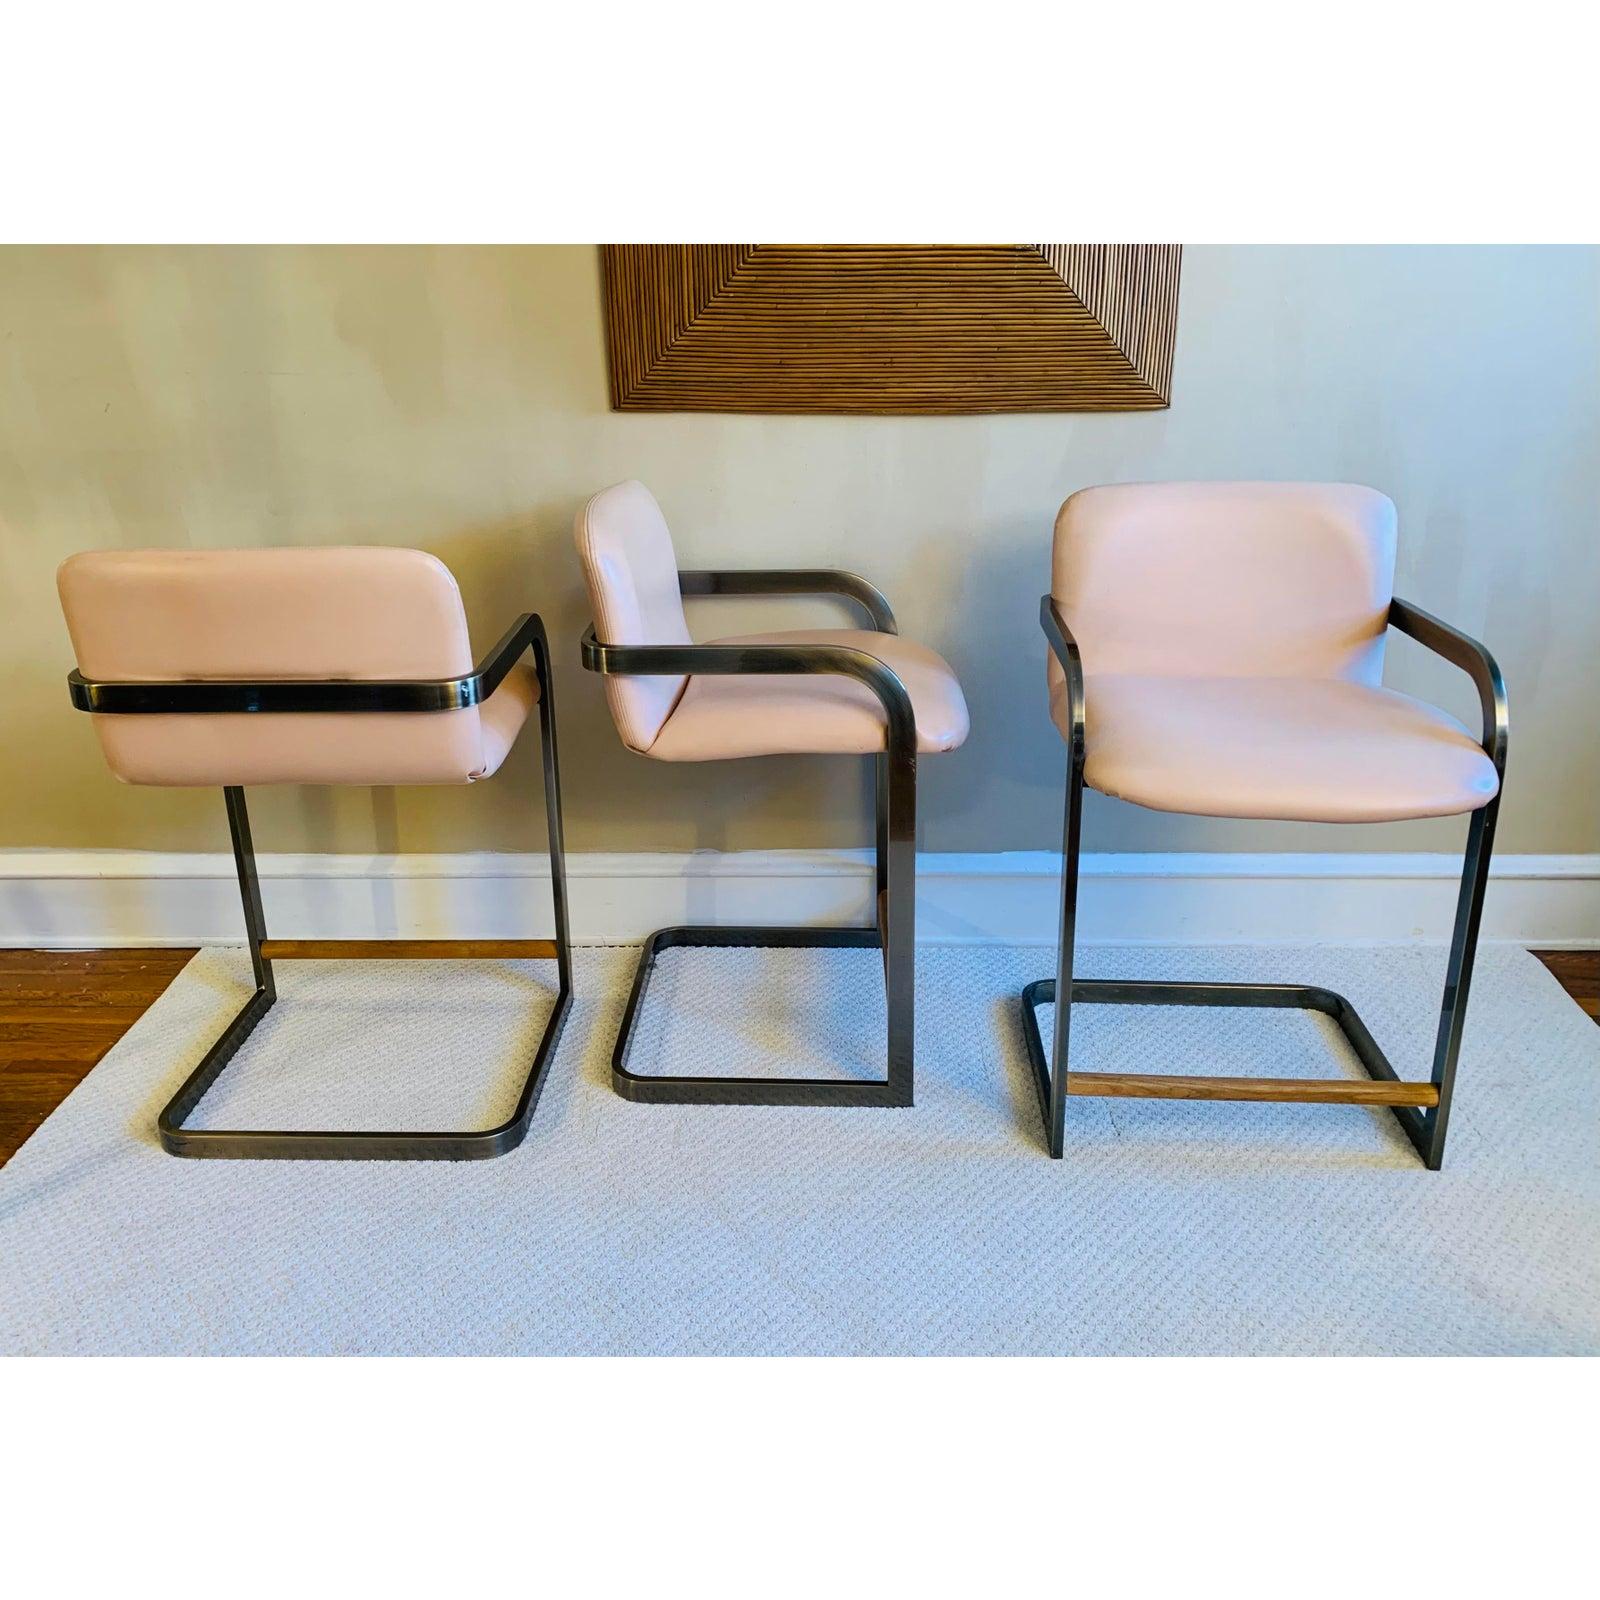 Mid-Century Modern Vintage Midcentury Cantilever Stools in the Milo Baughman Style by D.I.A. 1980's